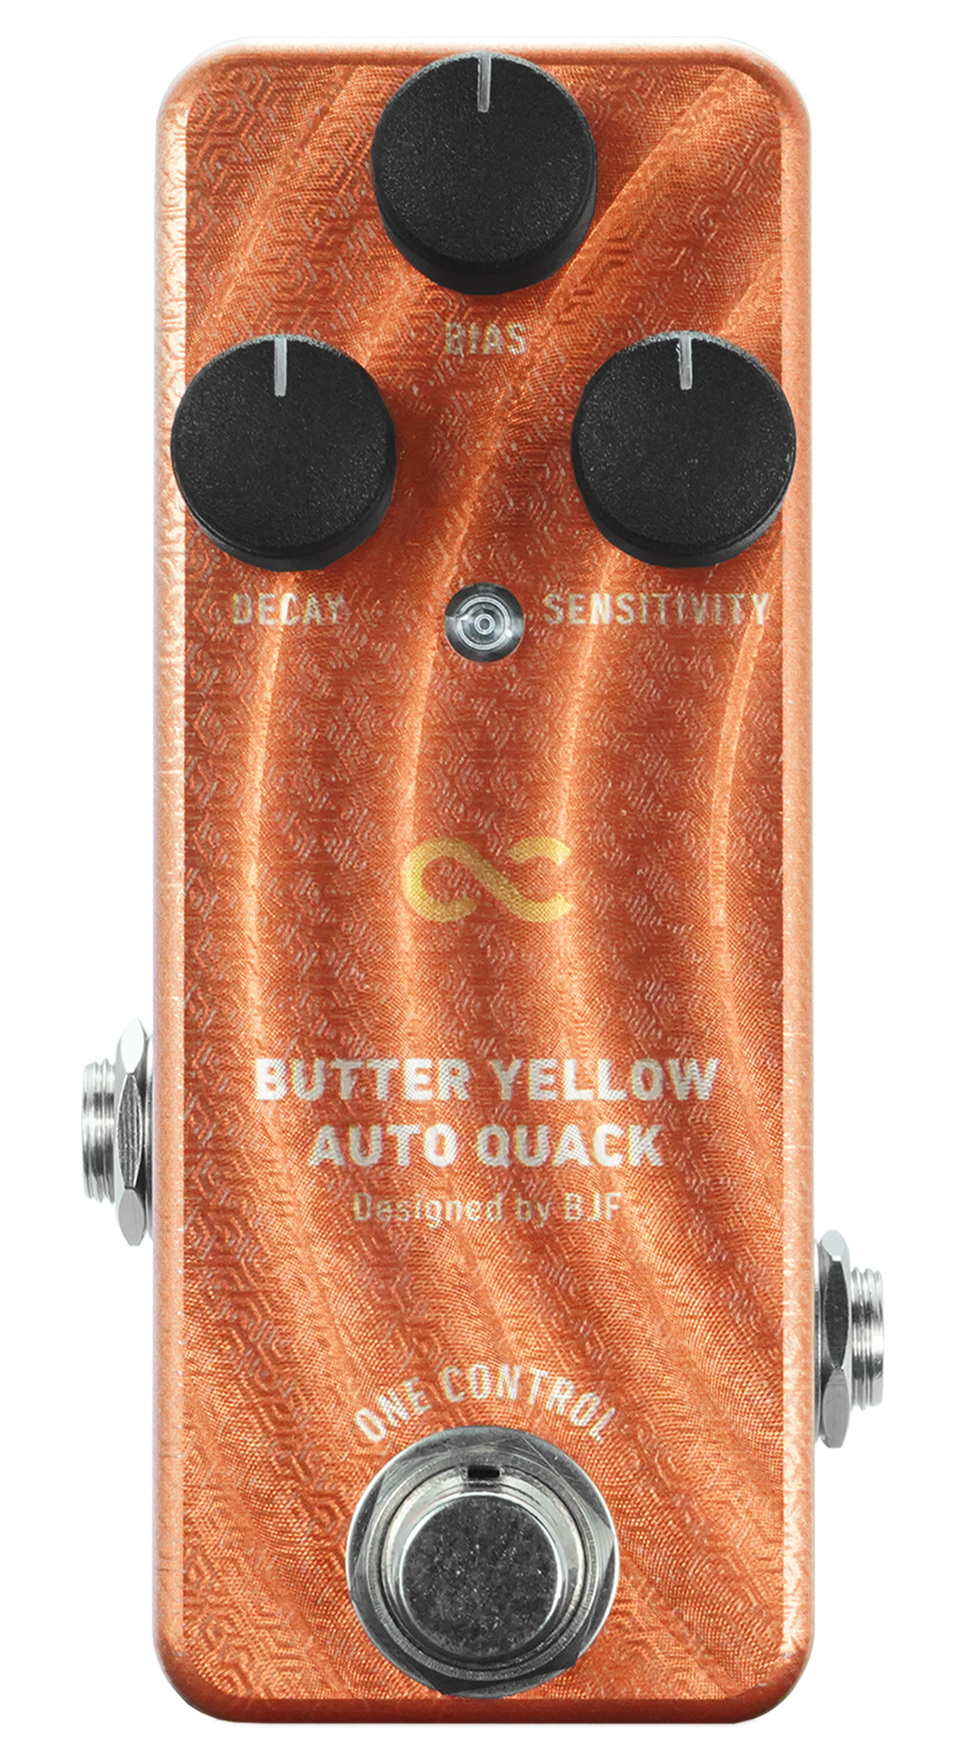 One Control Butter Yellow Auto Quack - Envelope Filter / Auto Wah